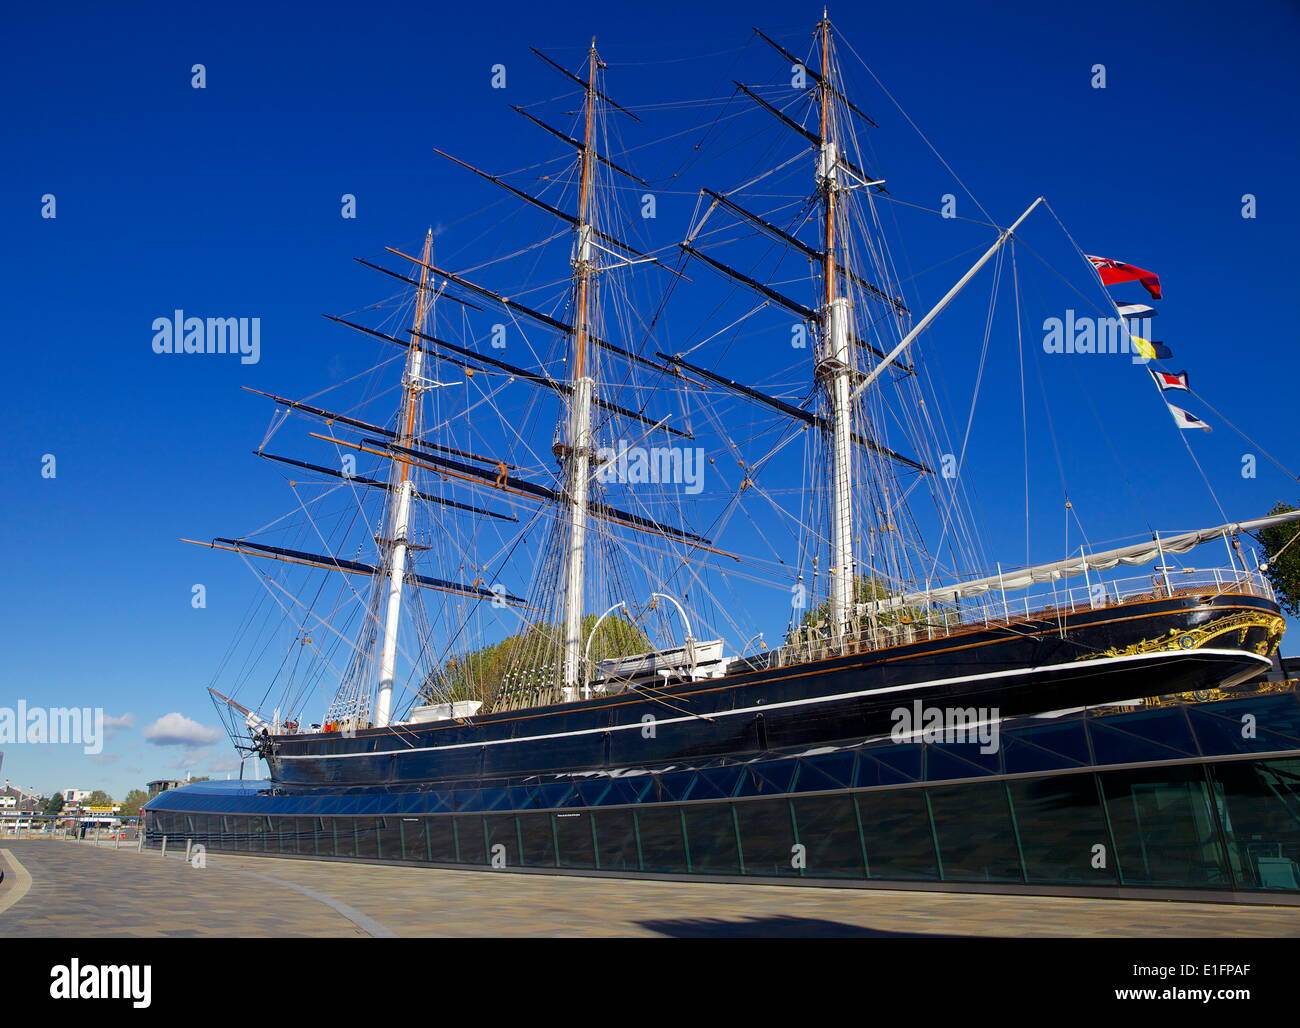 The Cutty Sark, a British Tea Clipper built in 1869 moored near the Thames at Greenwich, London, England, United Kingdom, Europe Stock Photo